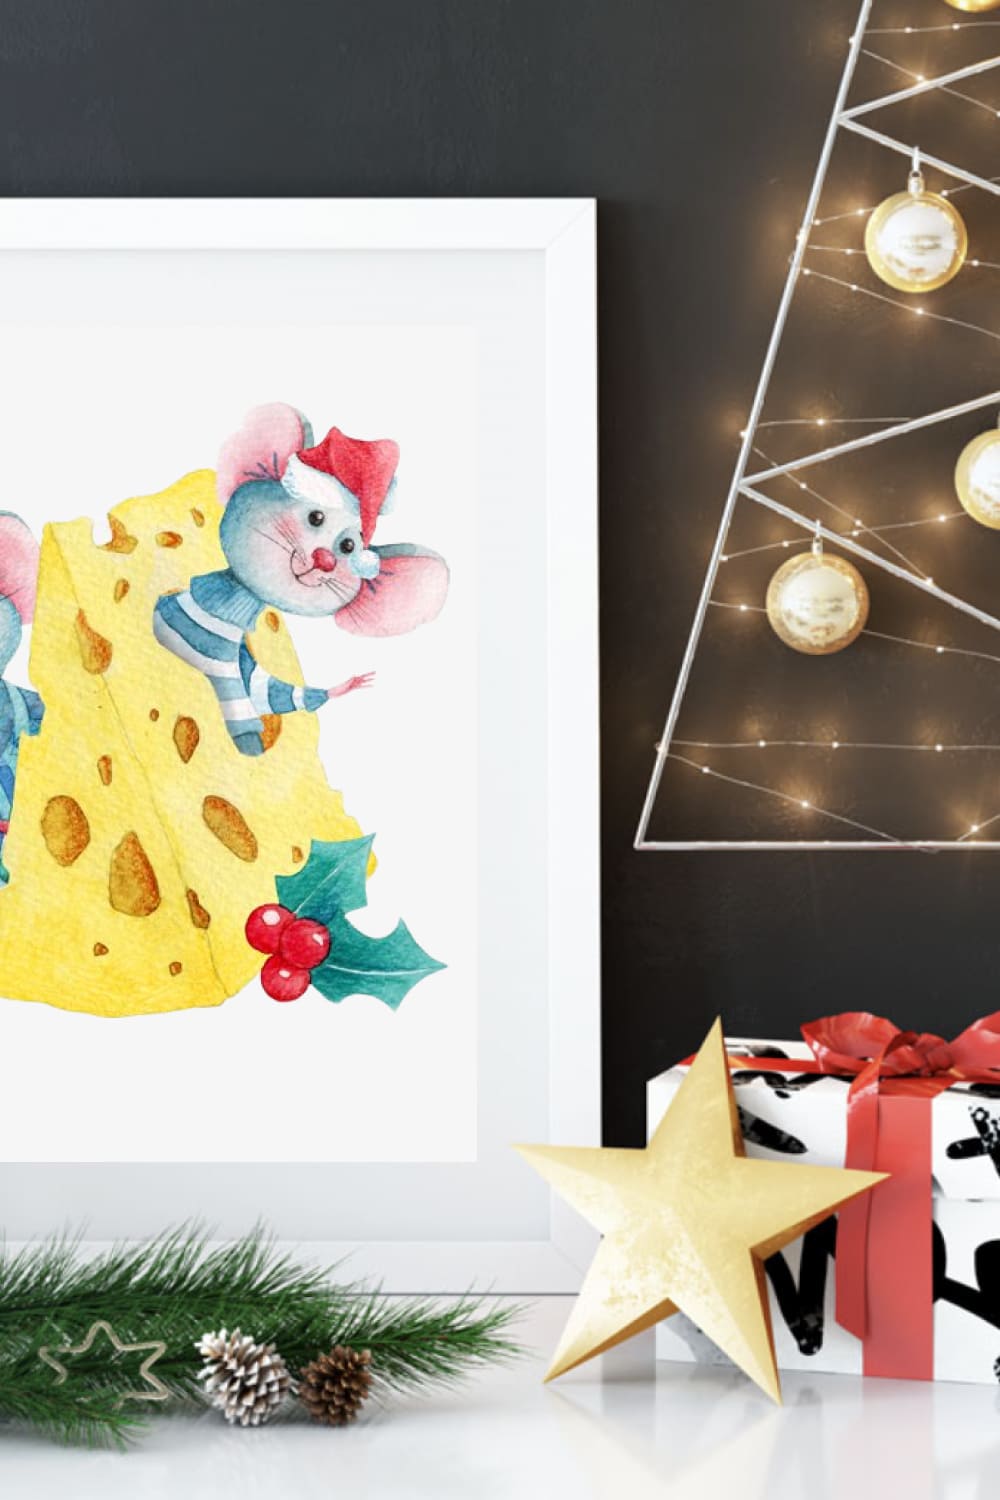 Cute illustrations will look great on your creative interior design.